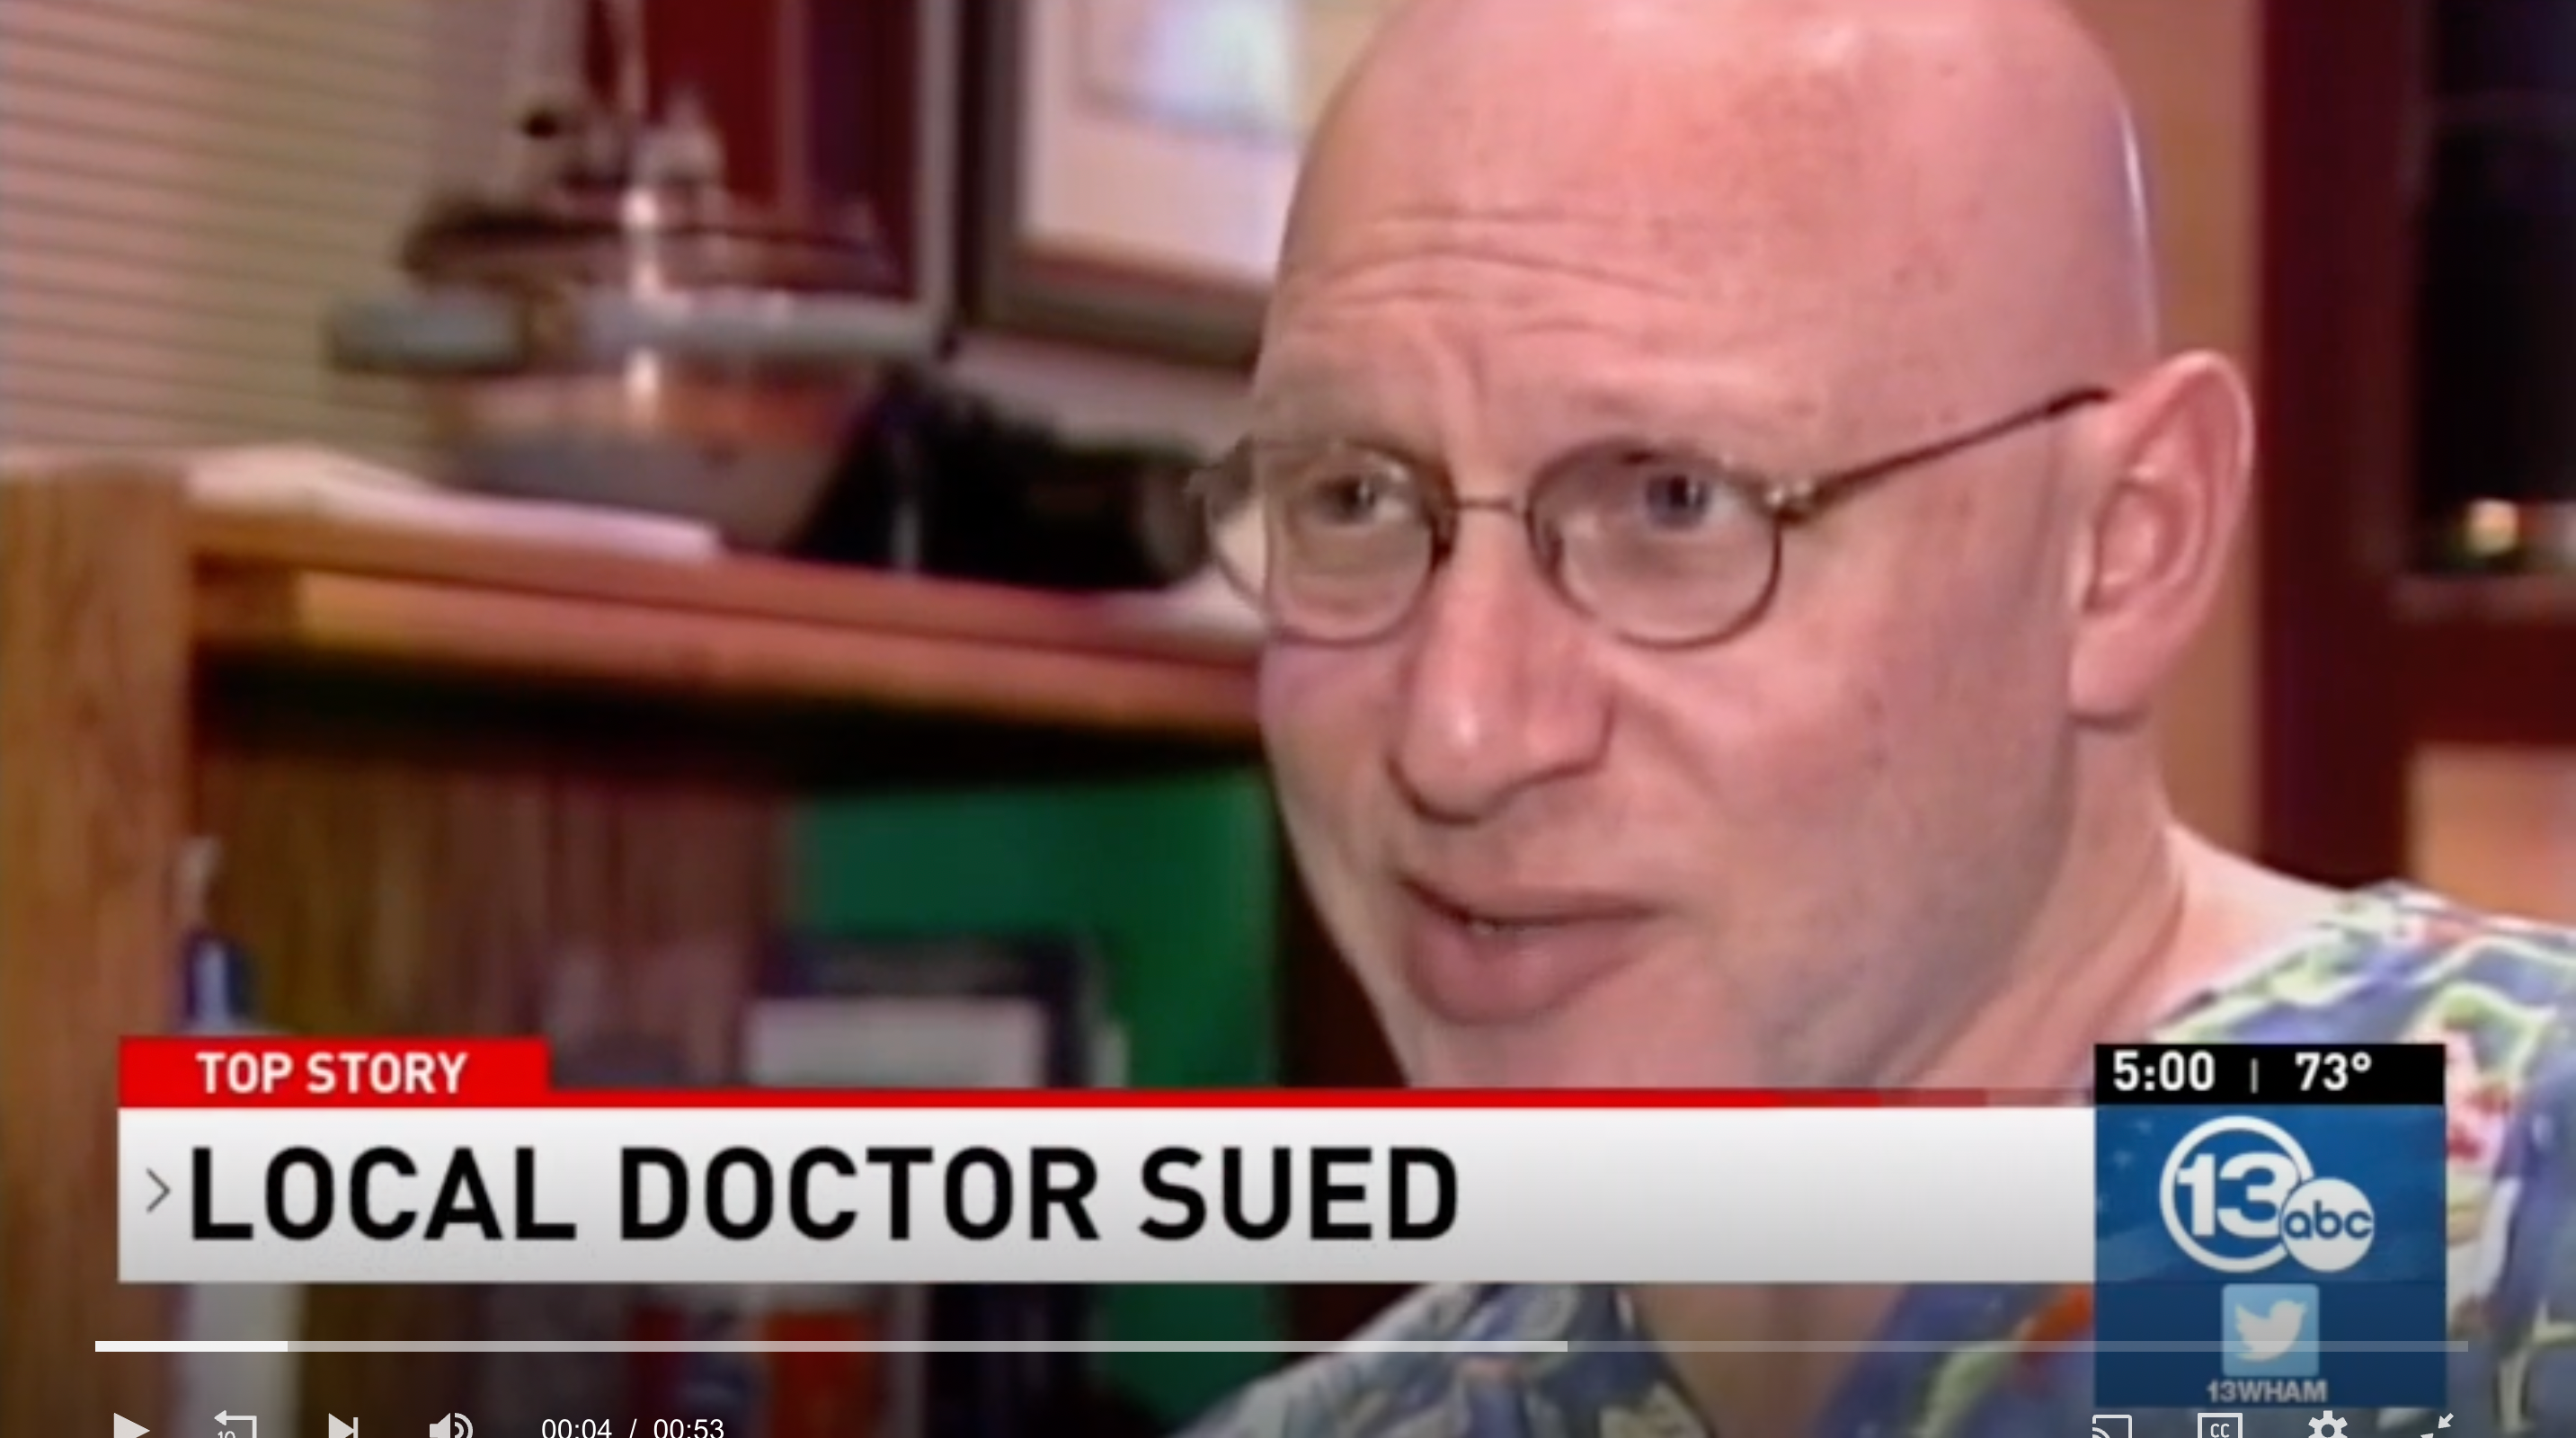 Dr Morris Wortman is being sued by an unnamed woman after artificially inseminating her mother.